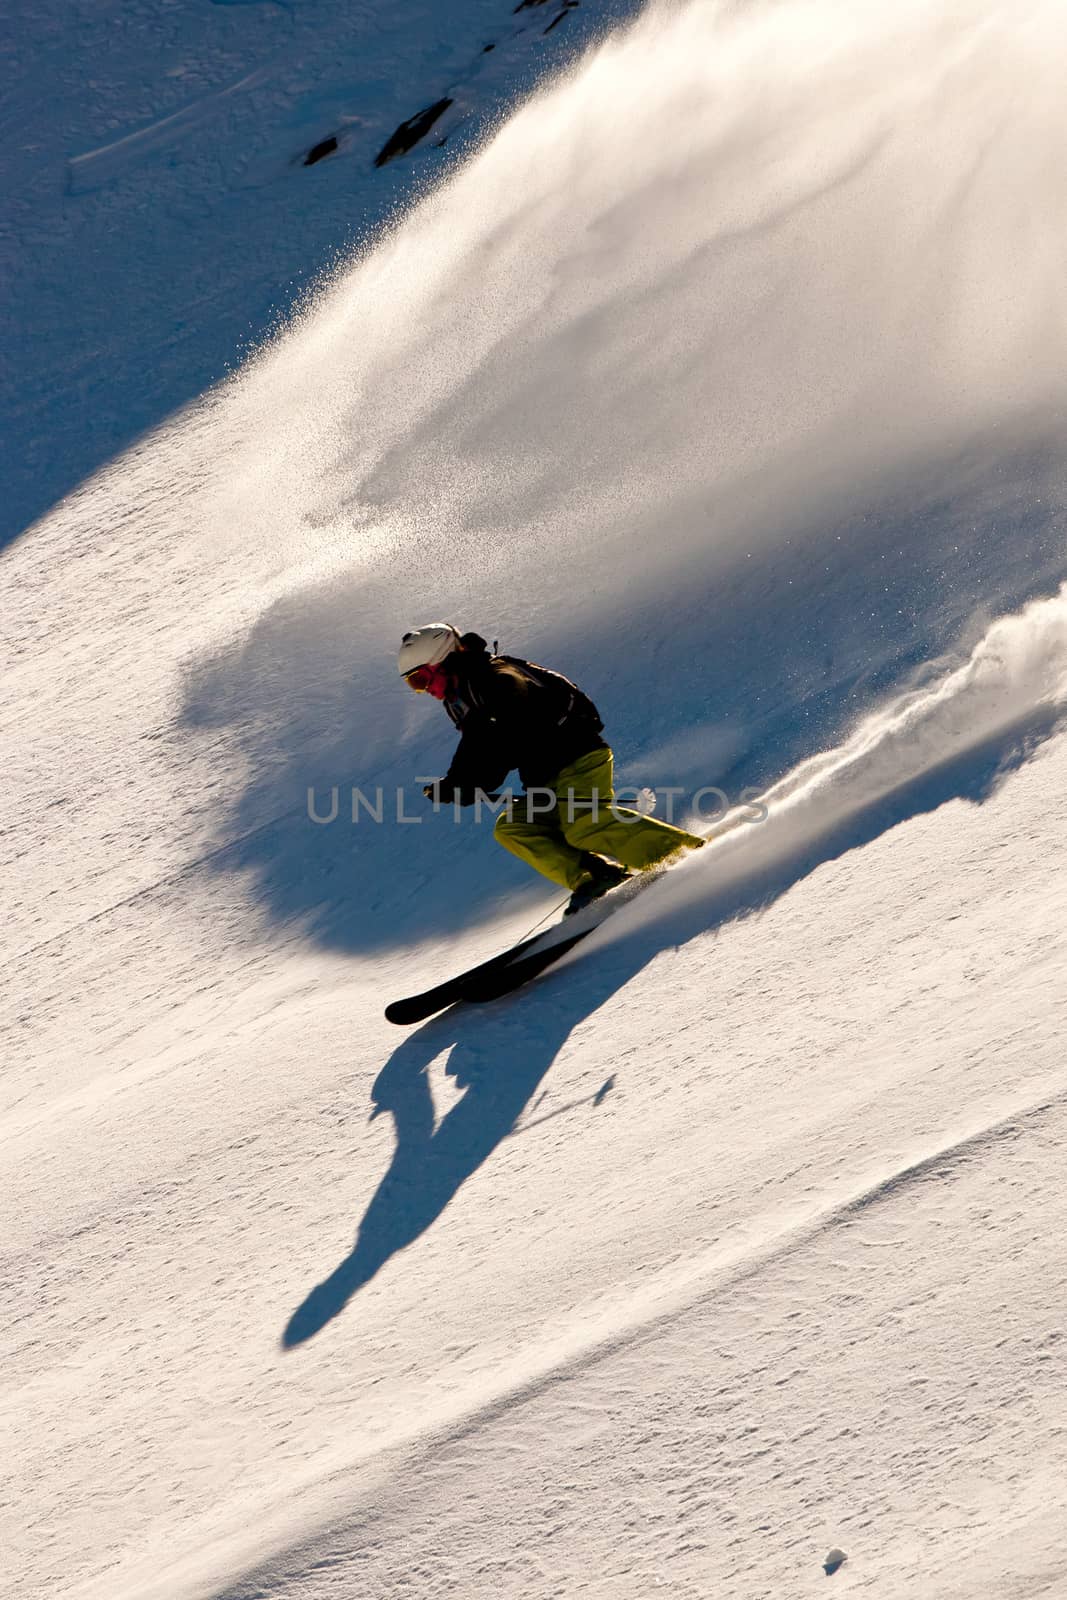 Freerider skiing in the mountains of Siberia